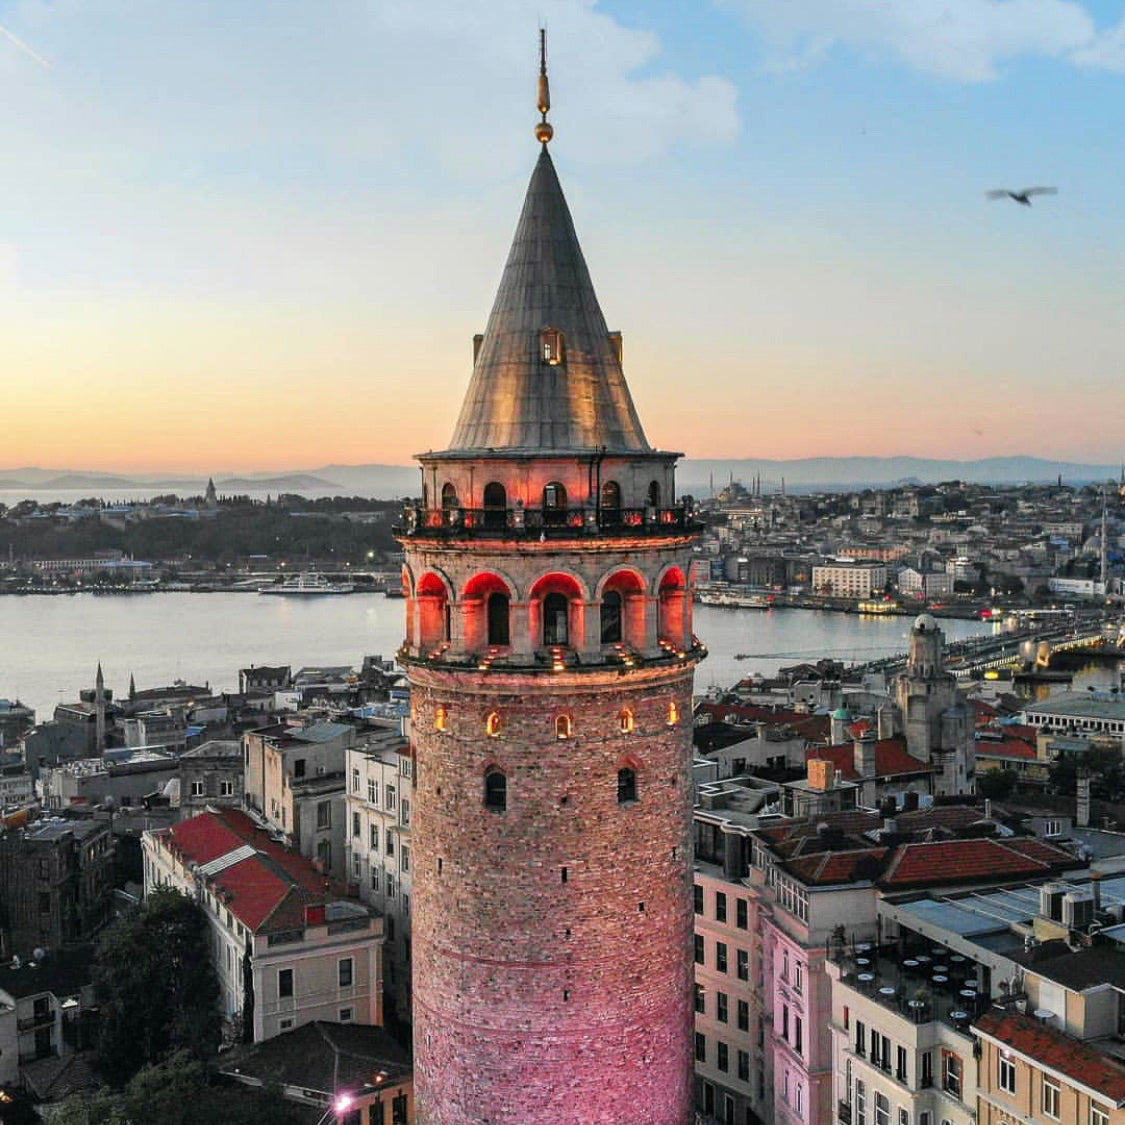 Sunrise over the Galata Tower in Istanbul. In the background is the Golden Horn and The Blue Mosque